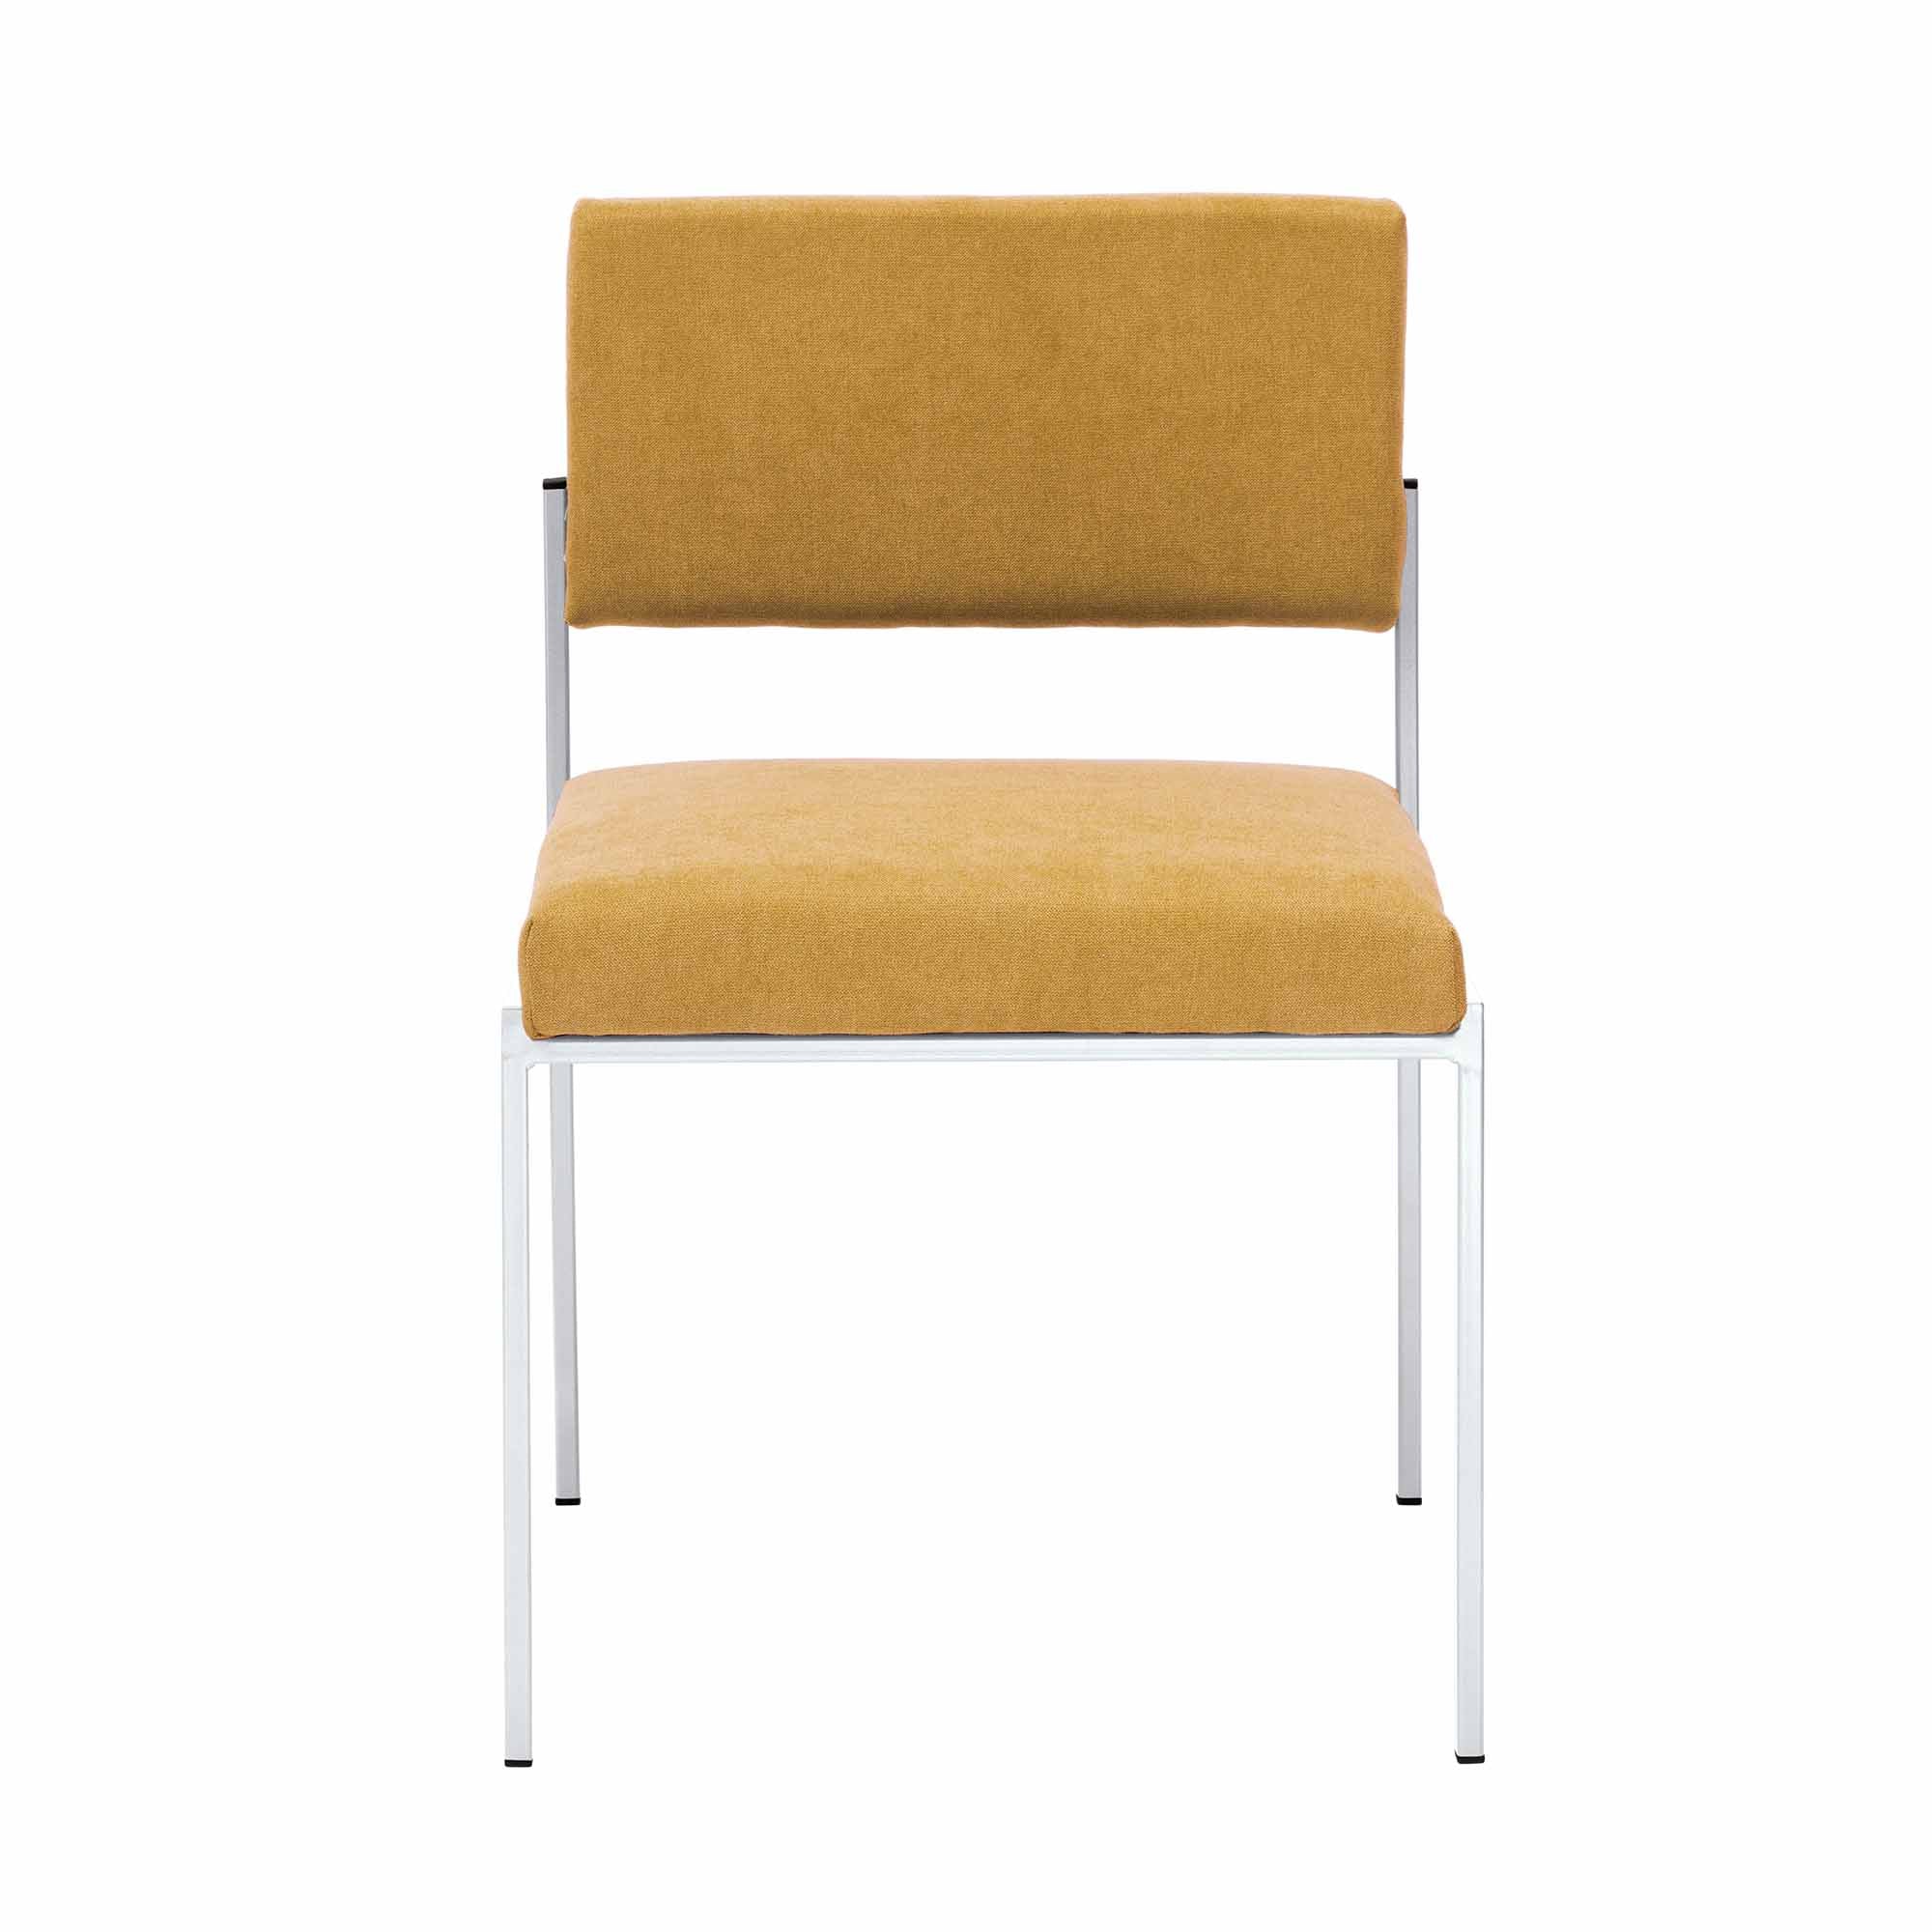  Chair, Powder-Coated Steel Frame, front view yellow fabric, white frame